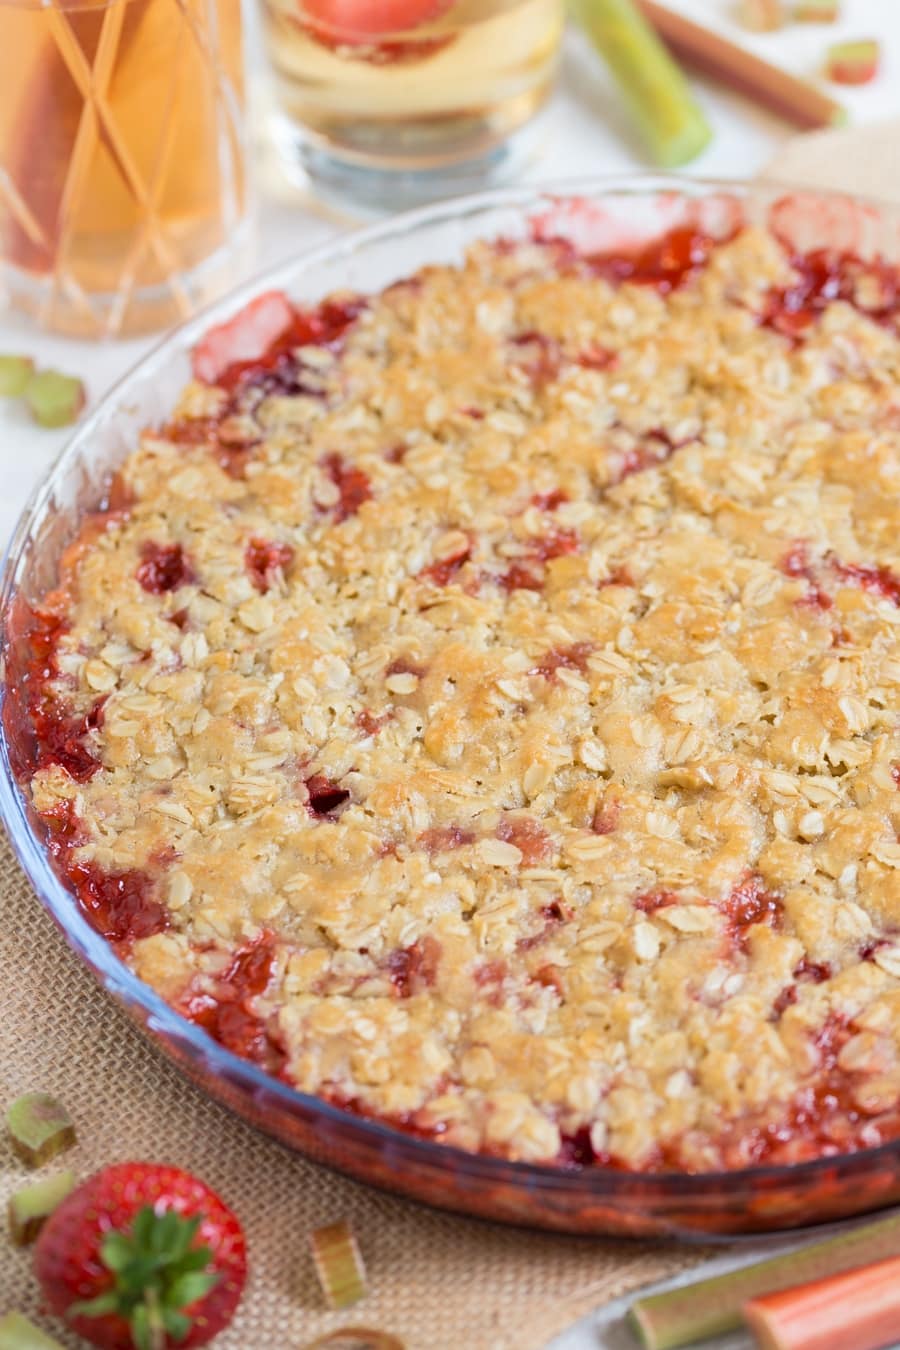 Closeup of strawberry rhubarb crisp showing the maple oat topping.